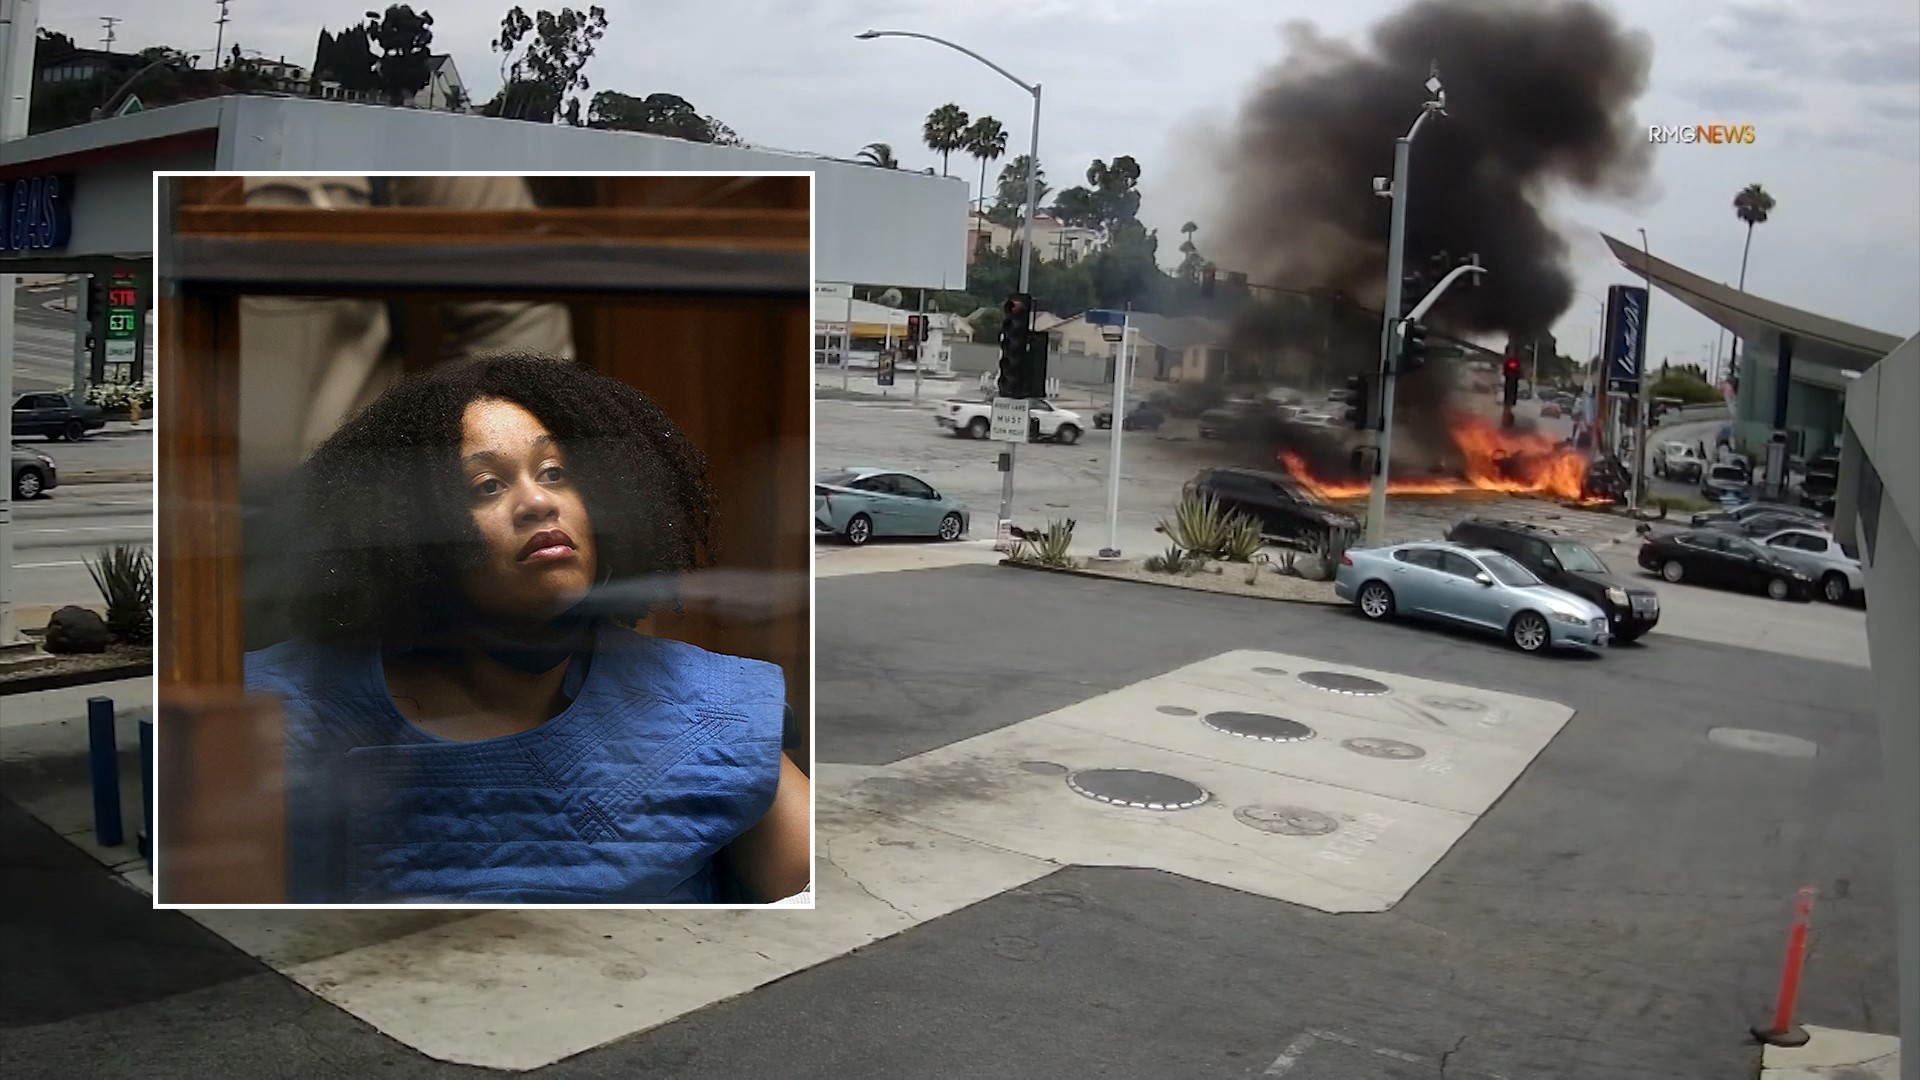 Court documents say Nicole Linton, a traveling nurse from Houston, held down the gas pedal for at least five seconds before crashing at a Los Angeles intersection.